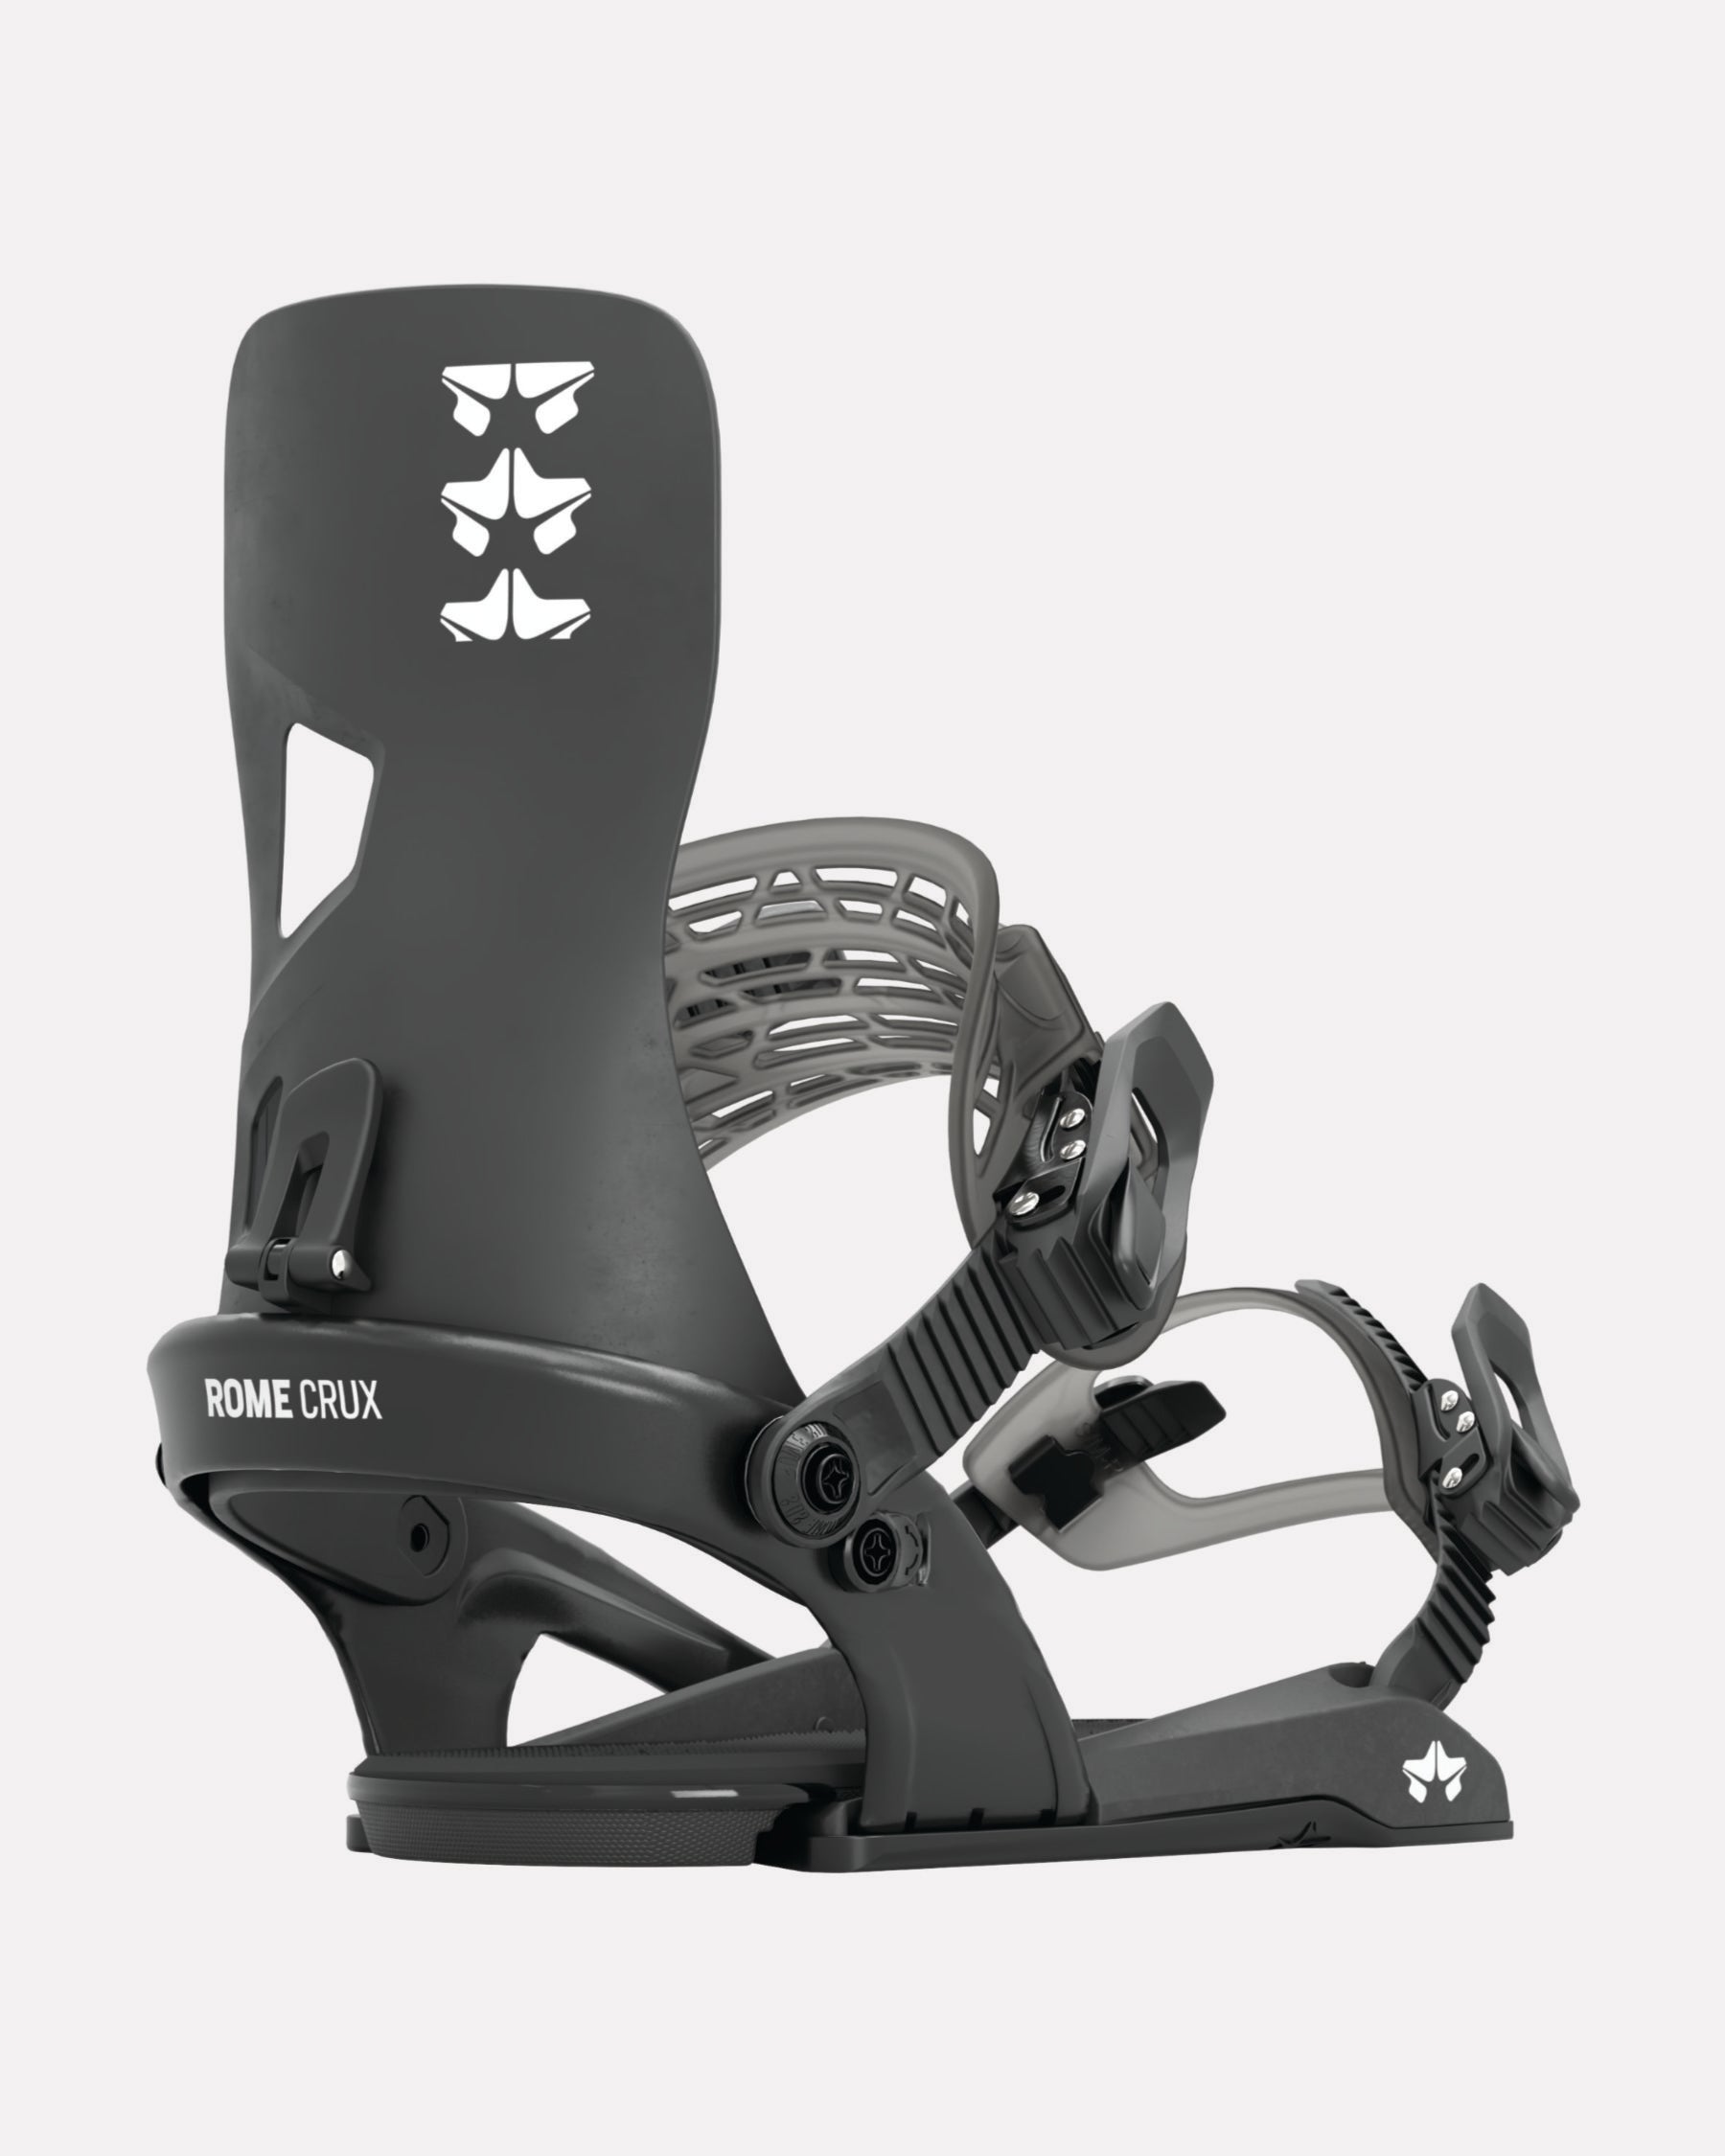 Rome Crux 2023 mens snowboard bindings product photo from the back cover shot in the studio color black